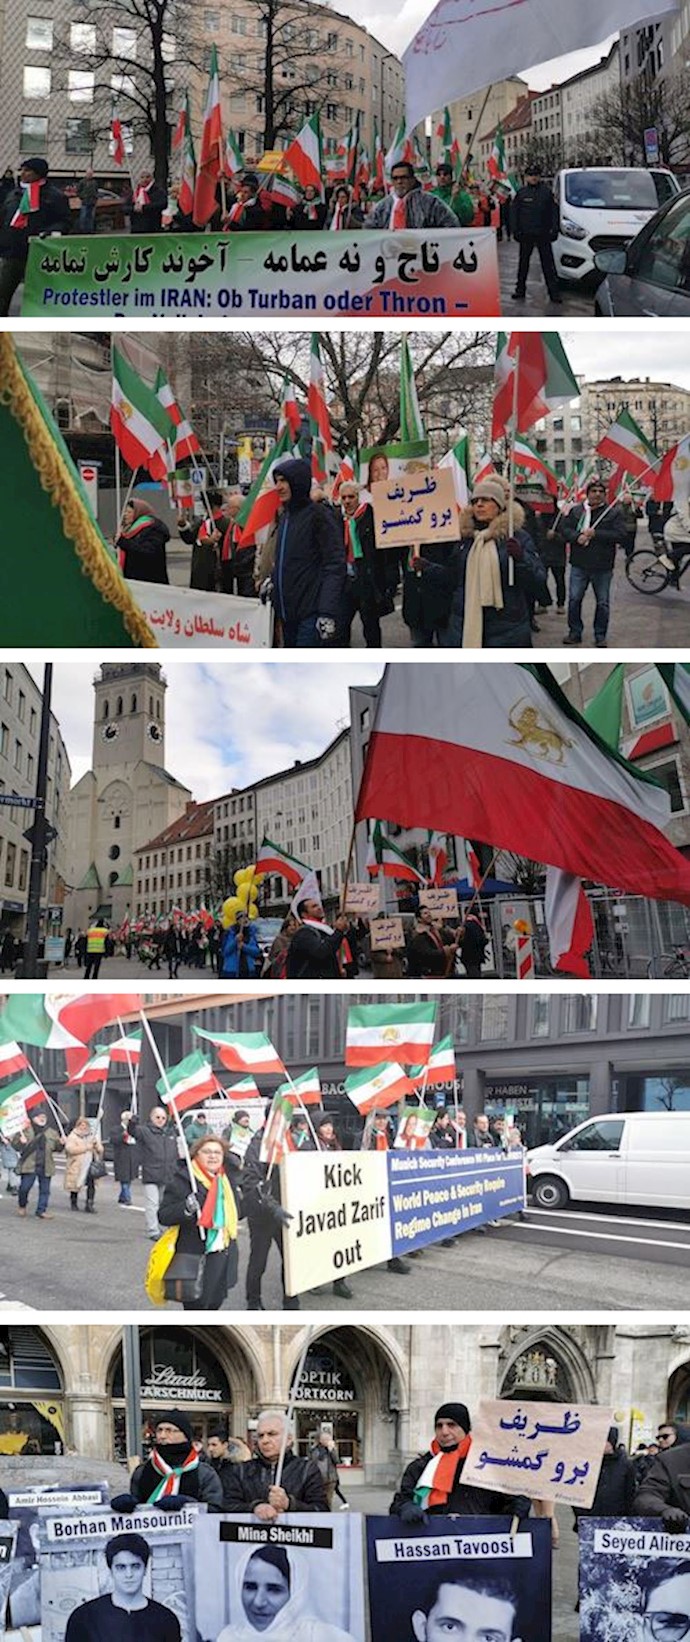 Freedom-loving Iranians and PMOI/MEK supporters rallying in Munich